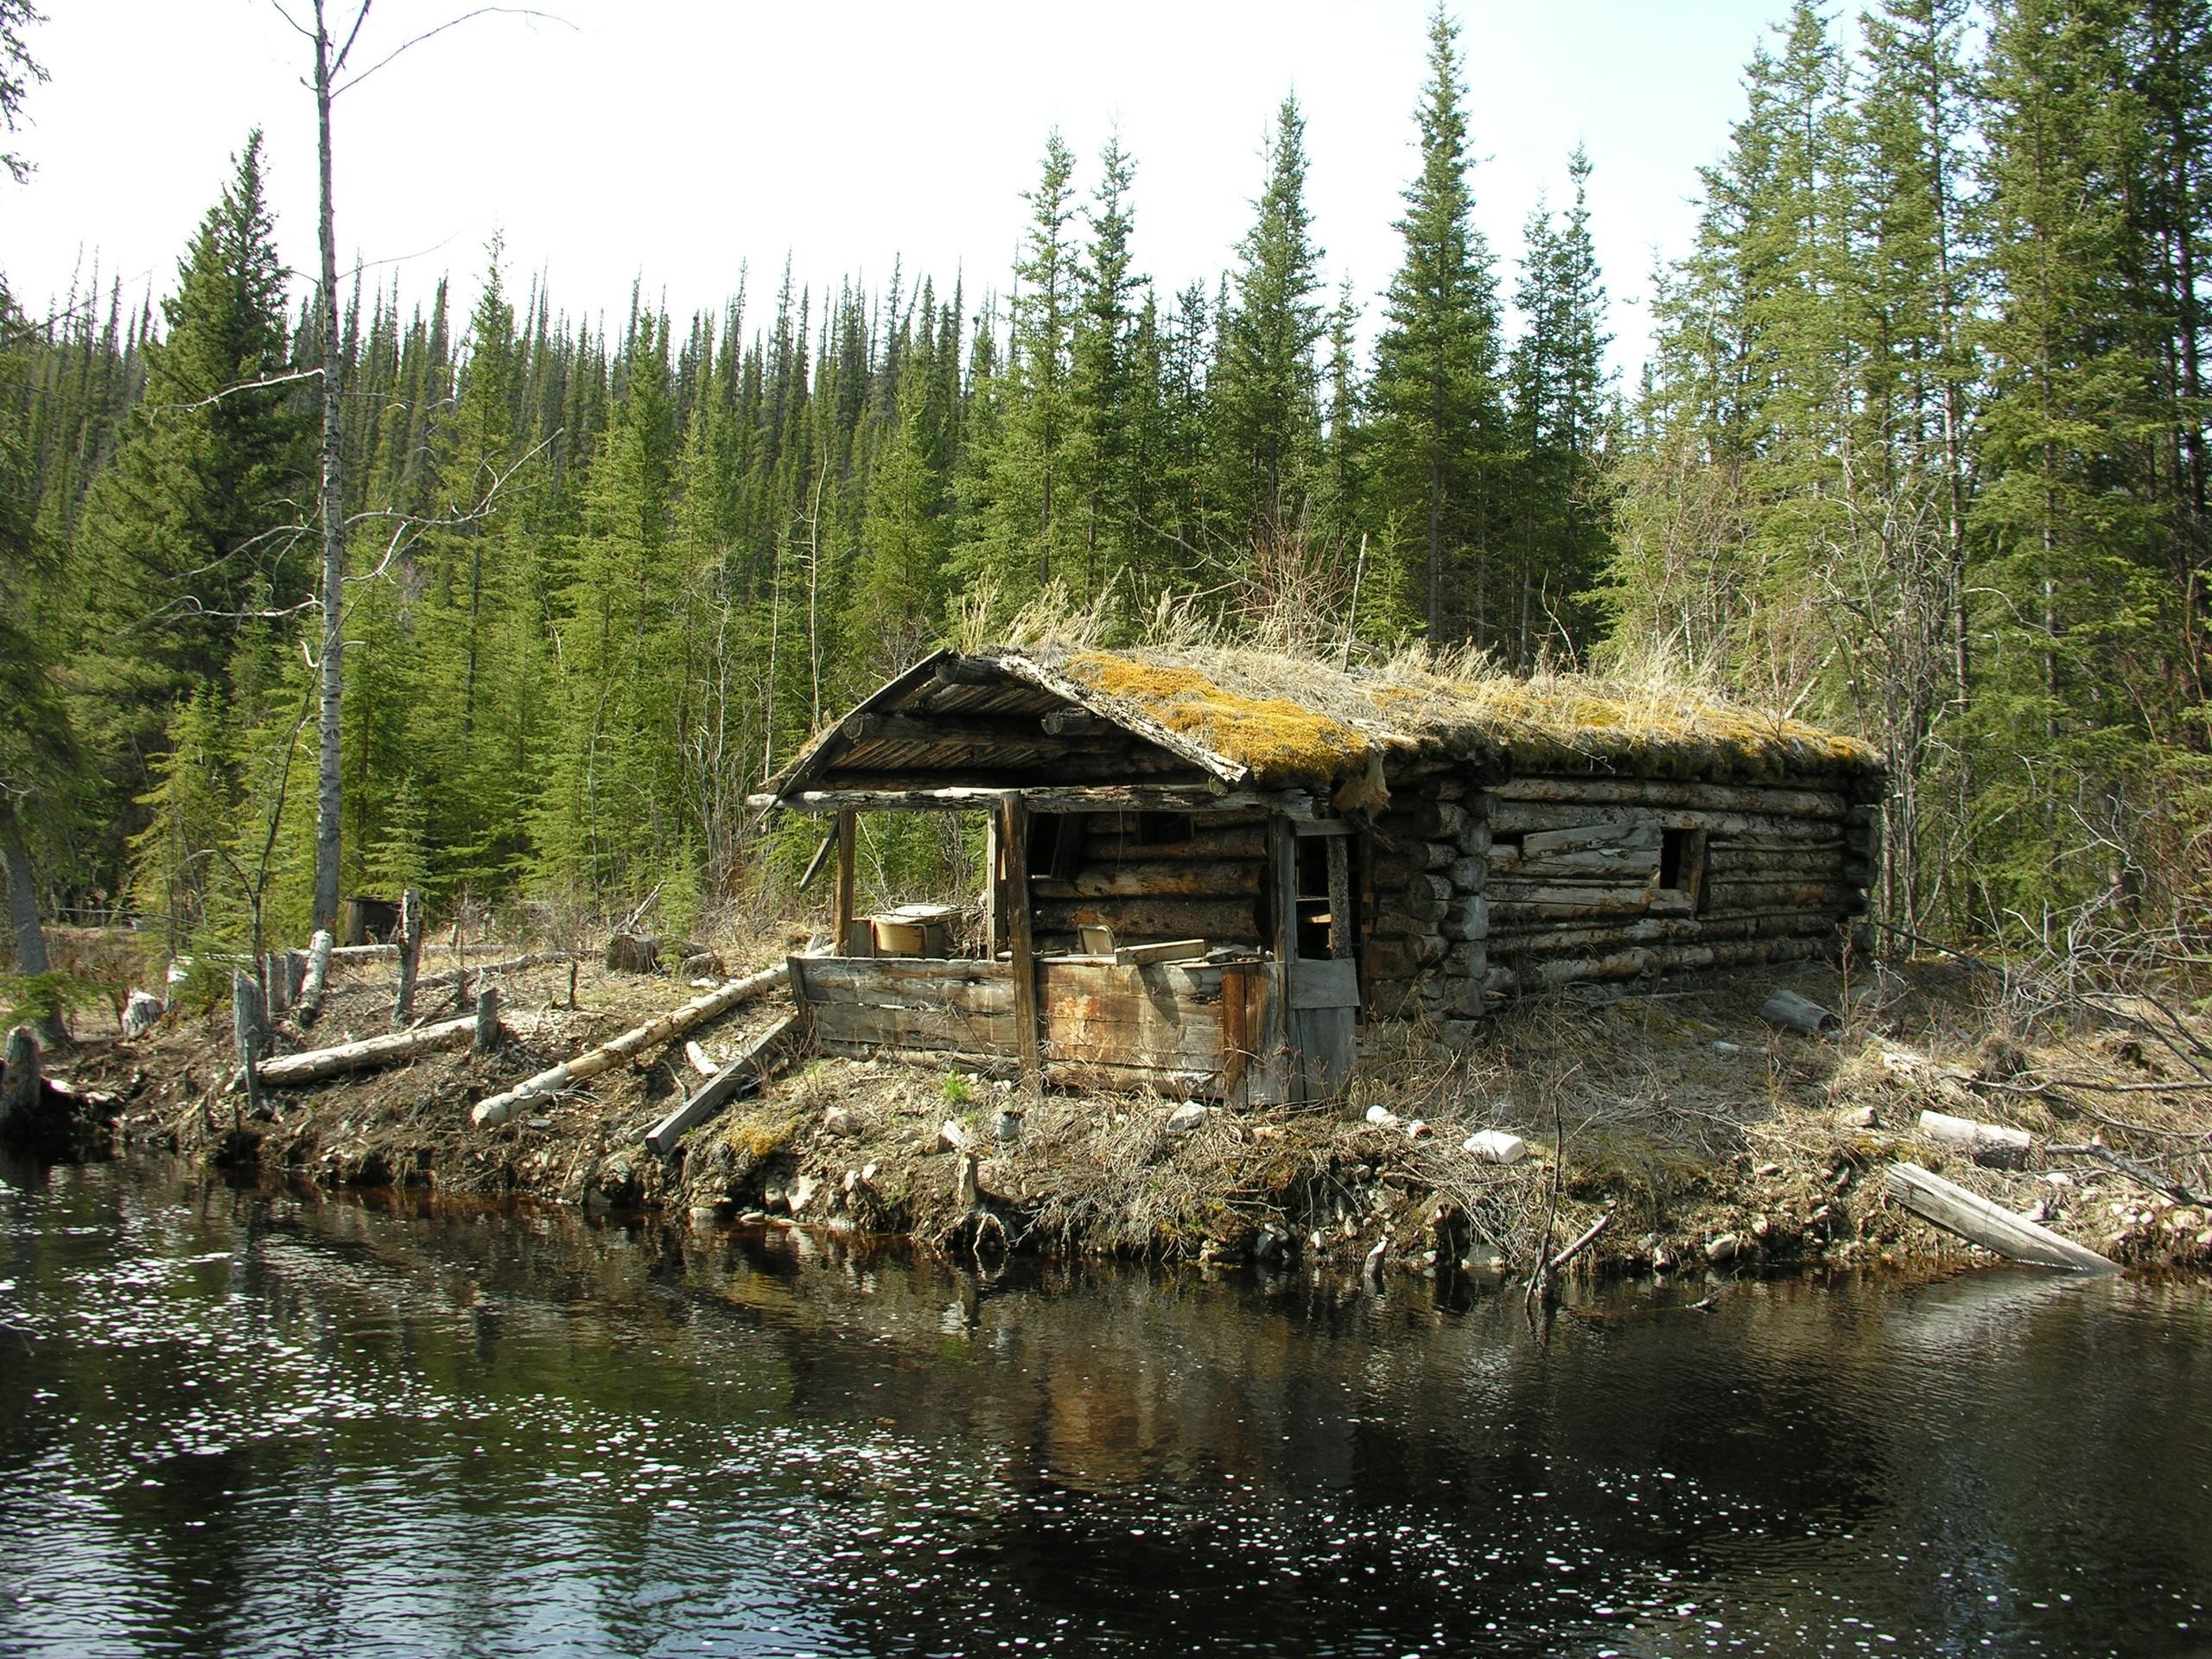 Siberia Tiny Homes - Old Cabin In Forest - HD Wallpaper 